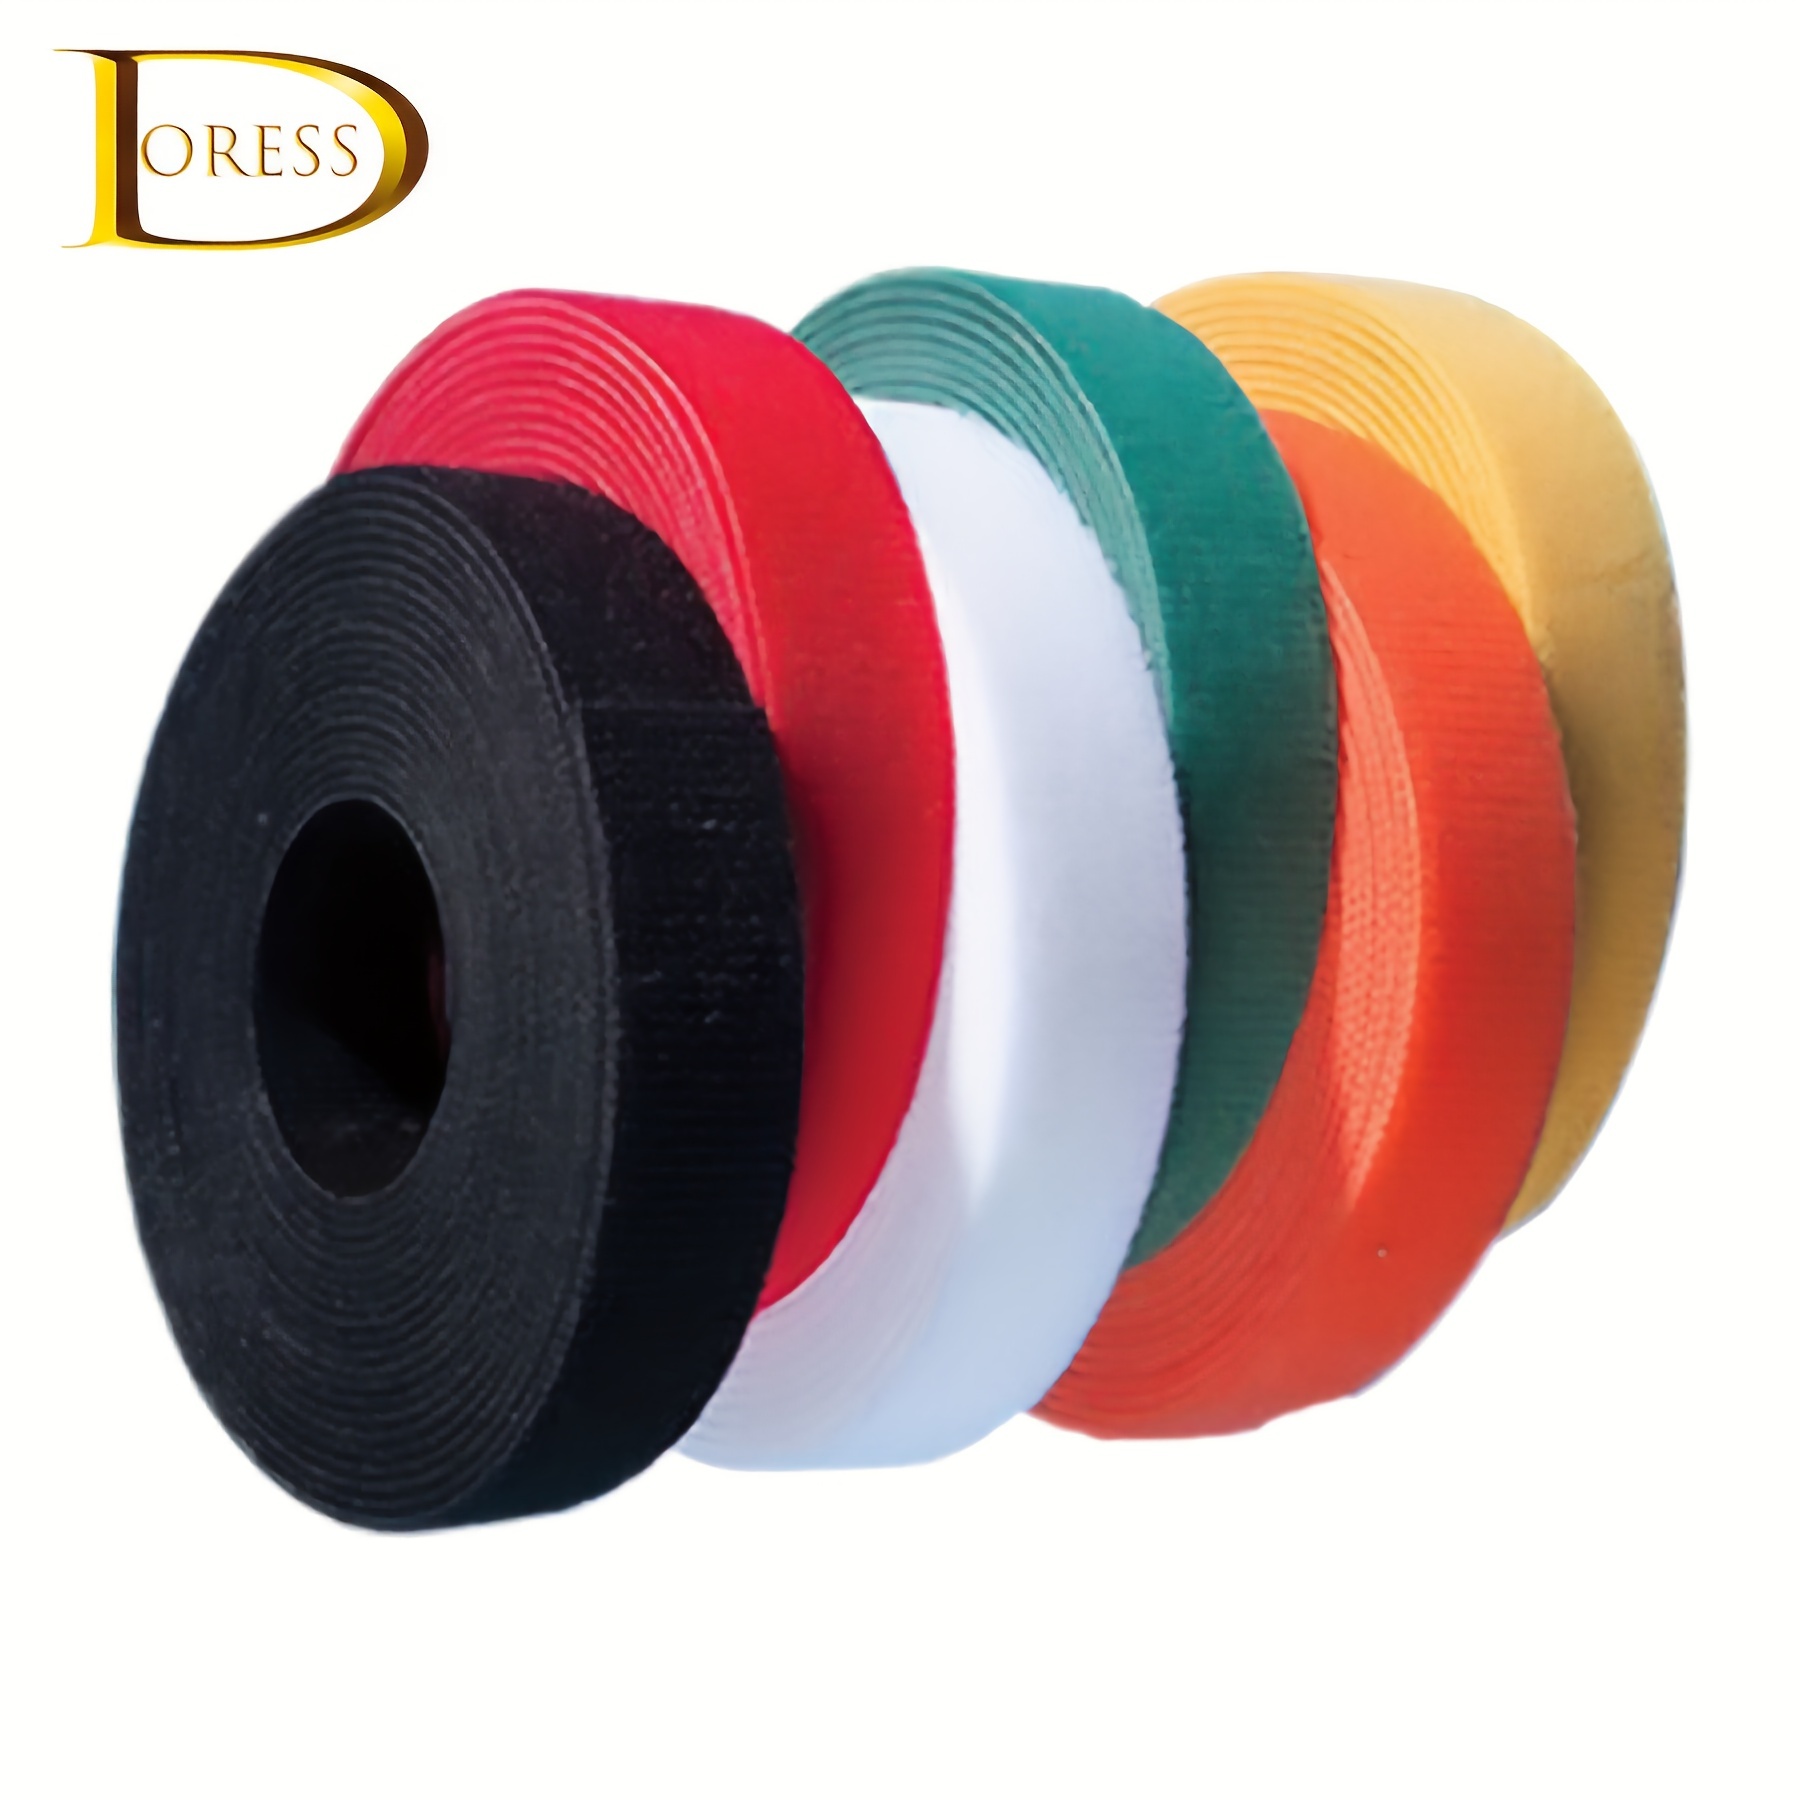  Hook and Loop Tape Strips - 4 Fabric Tape for Hemming Craft  Fabric Tape for Clothes Sewing Tape - Non-Adhesive Strips Nylon Fabric  Sticky Strips Industrial Mounting Tape - 12 Hook